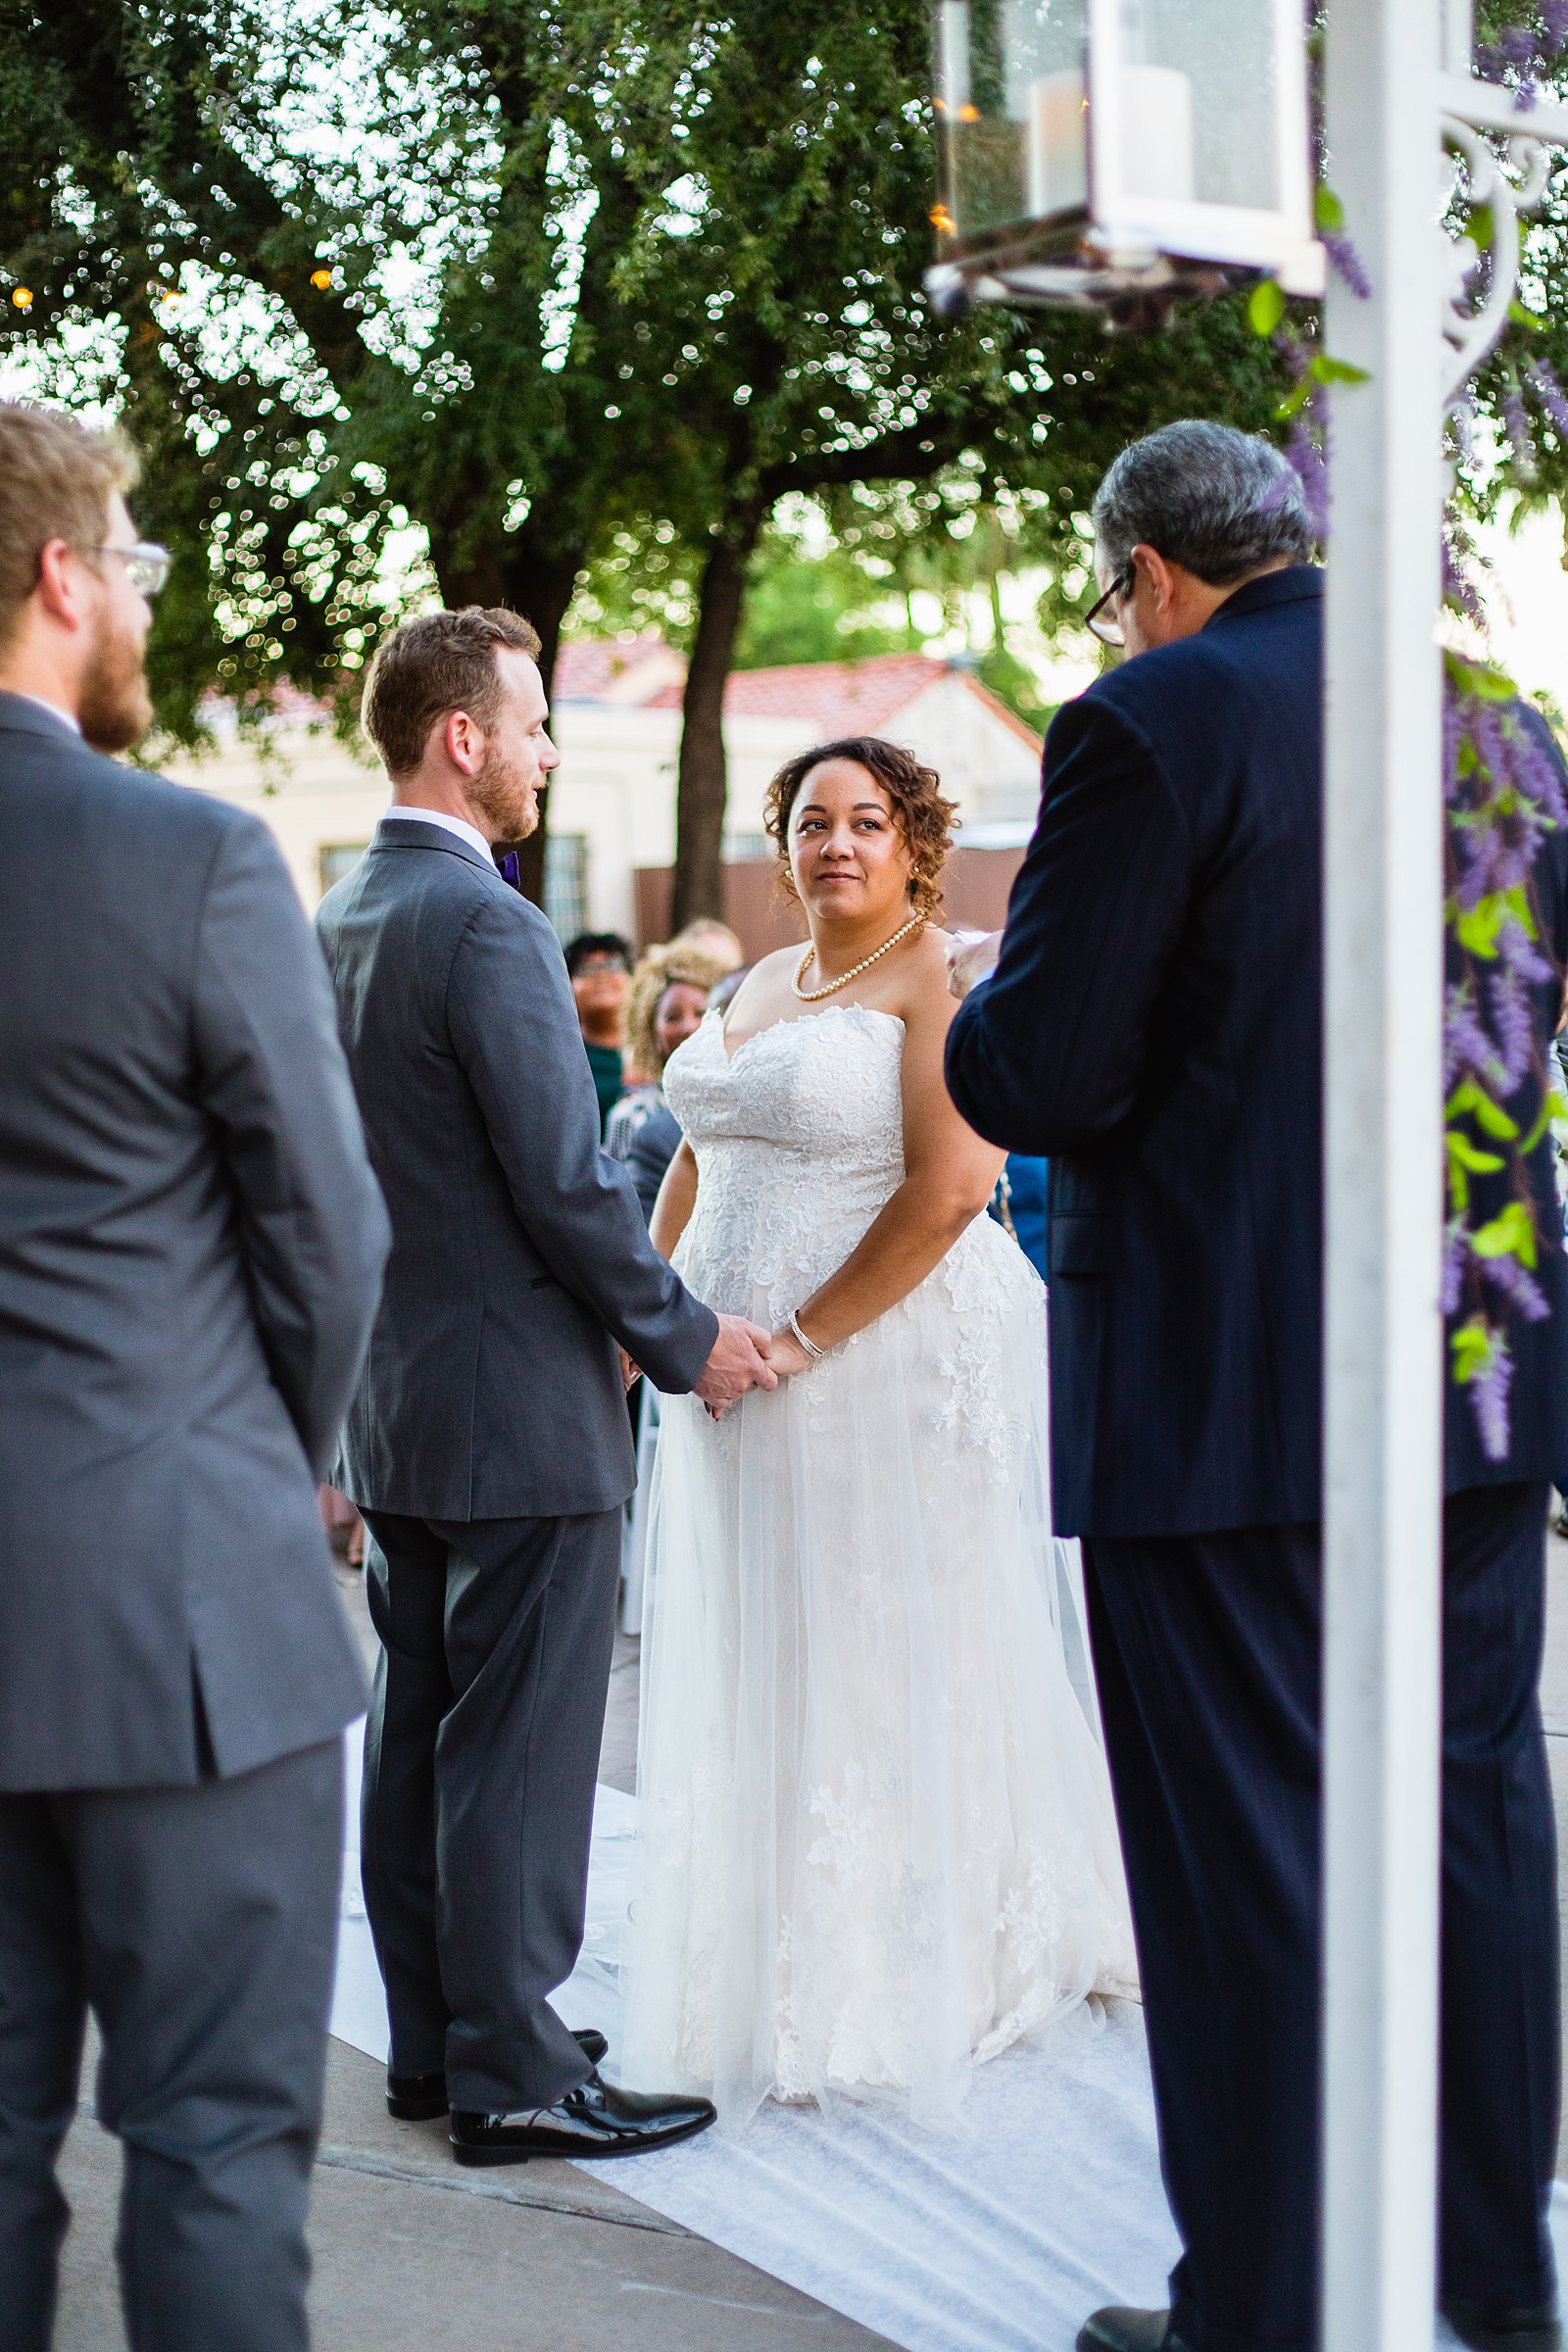 Bride and groom togethering during Encanto Park wedding ceremony by Phoenix wedding photographer PMA Photography.